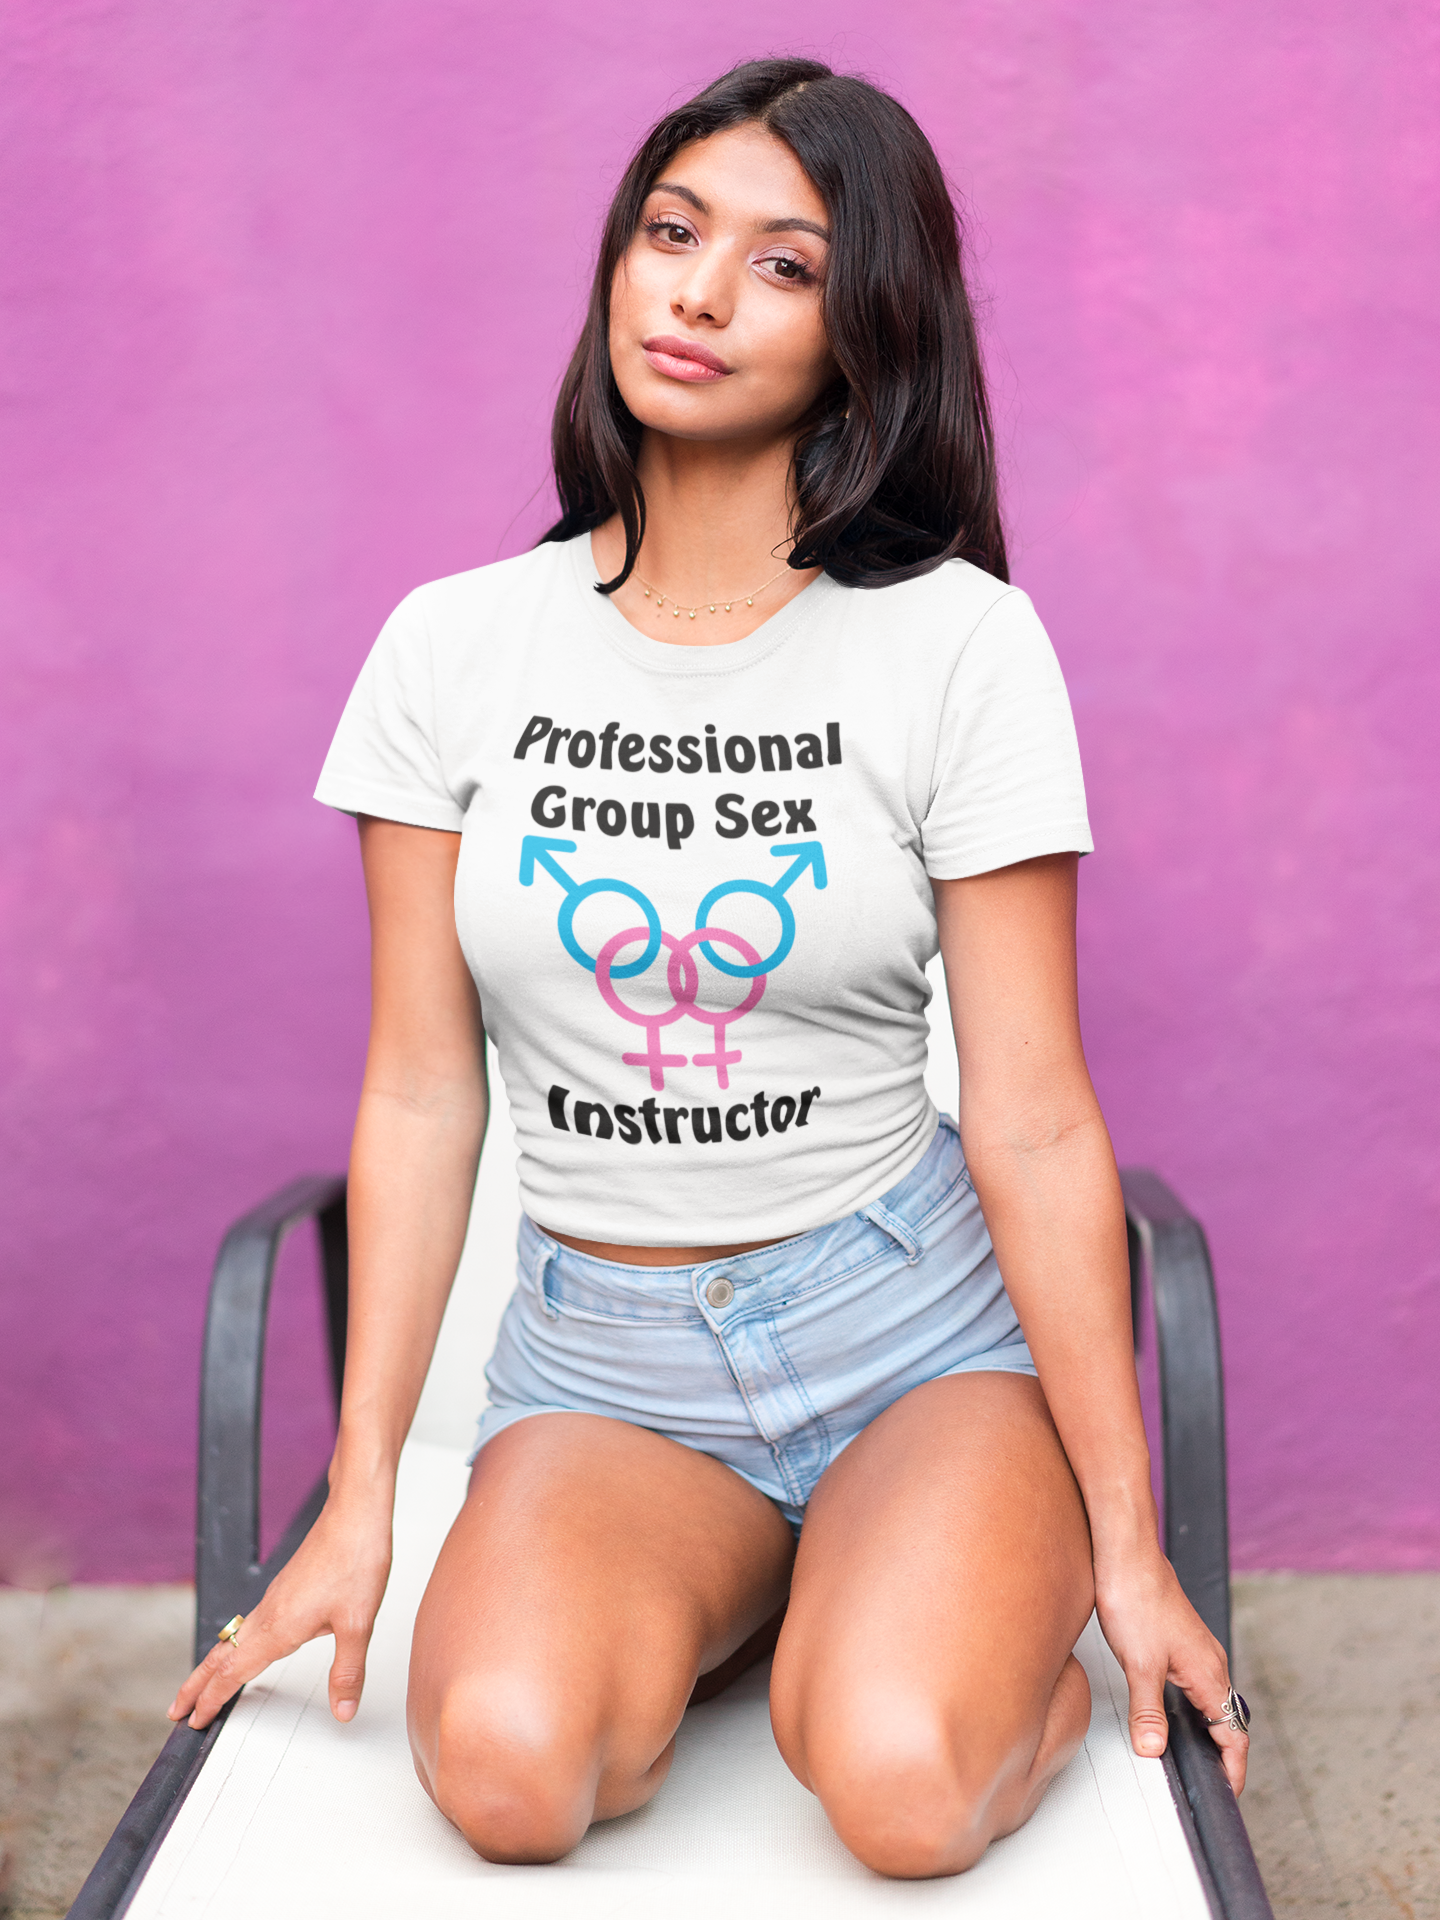 Professional Group Sex Instructor picture